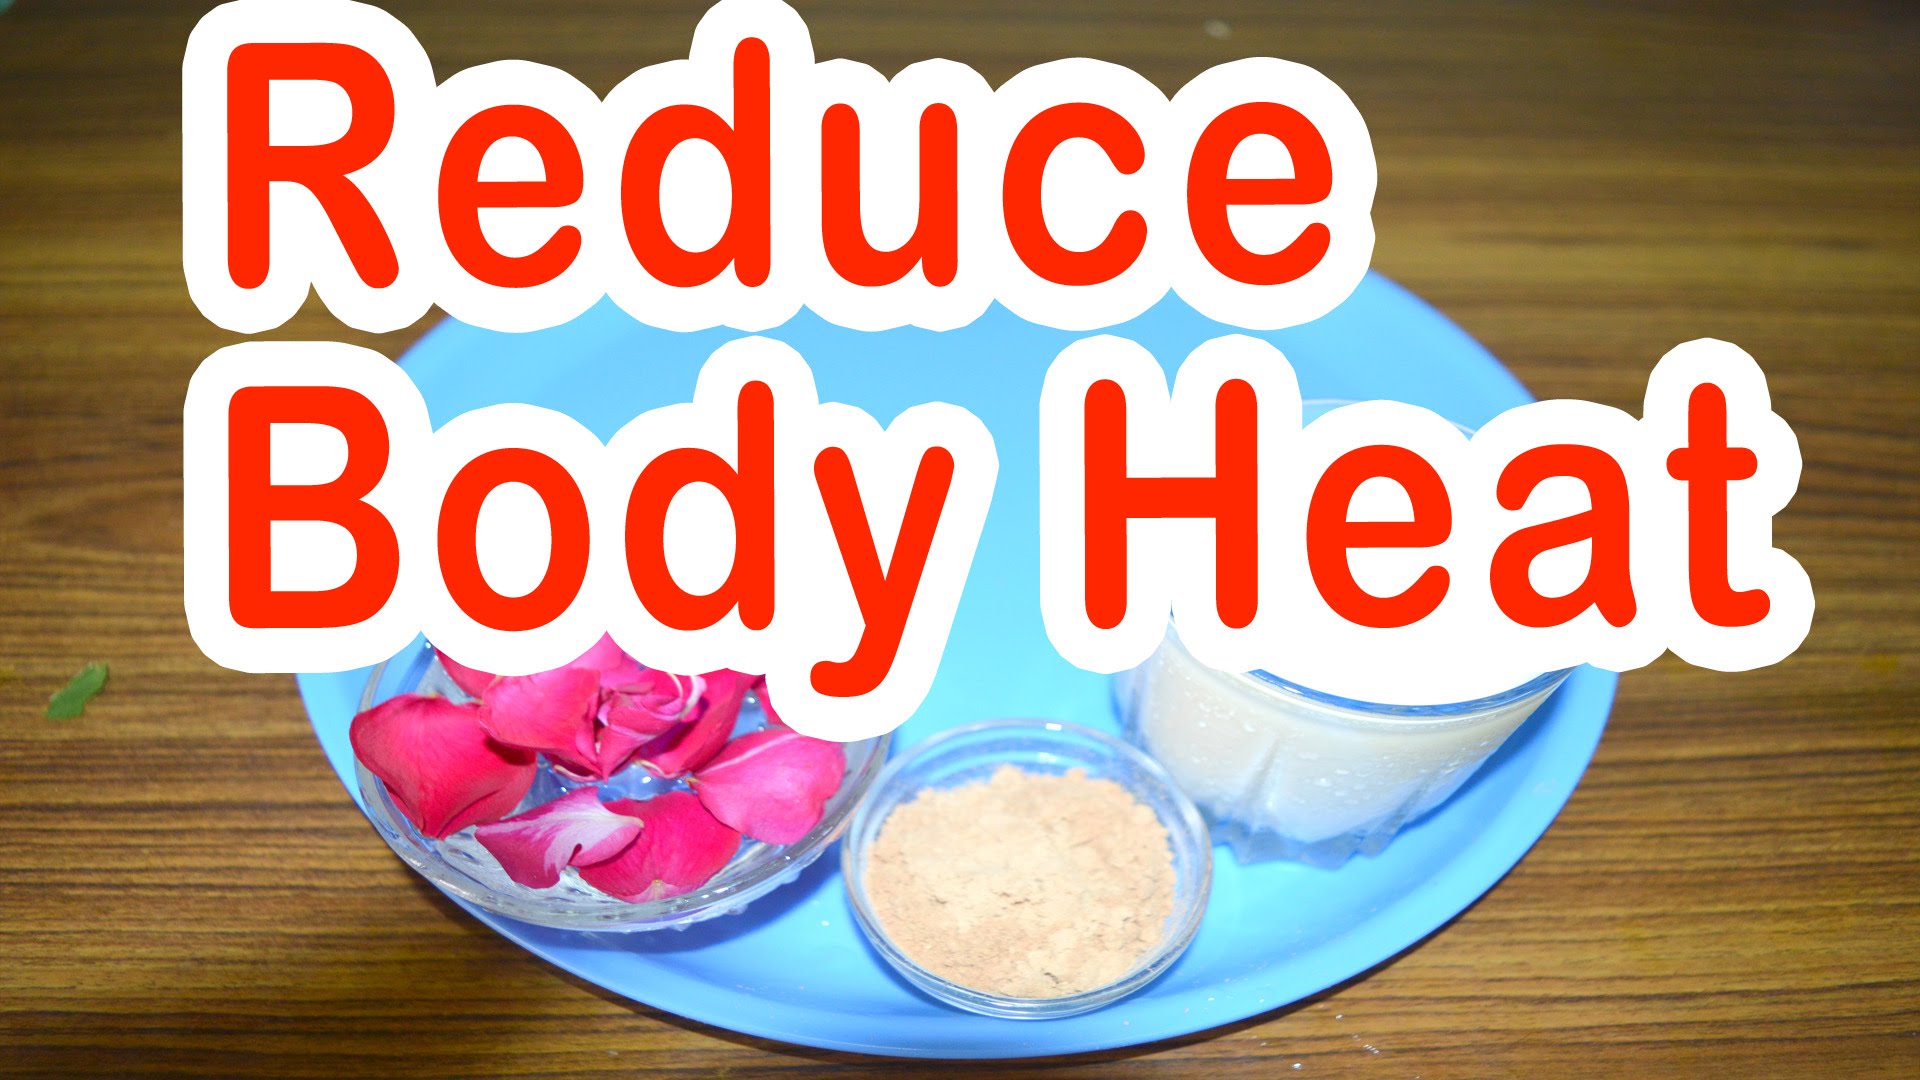 How to reduce body heat with ayurveda